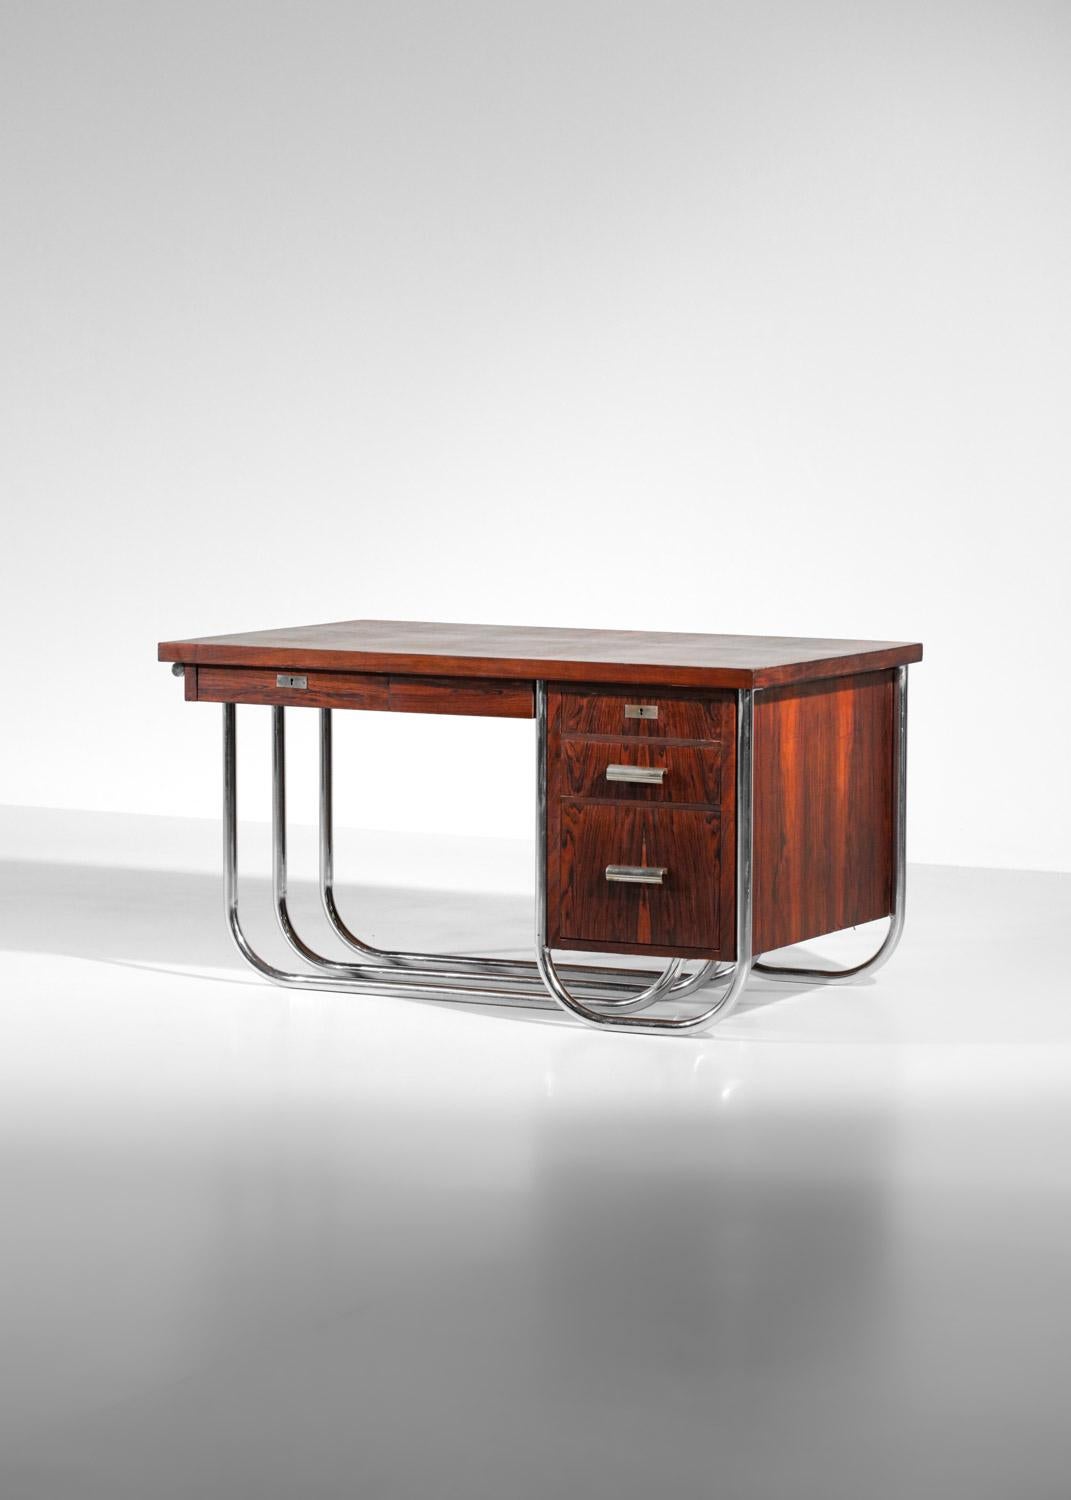 Modernist Desk in Solid Wood 40s / 50s Bauhaus Style Vintage In Good Condition For Sale In Ternay, Auvergne-Rhône-Alpes